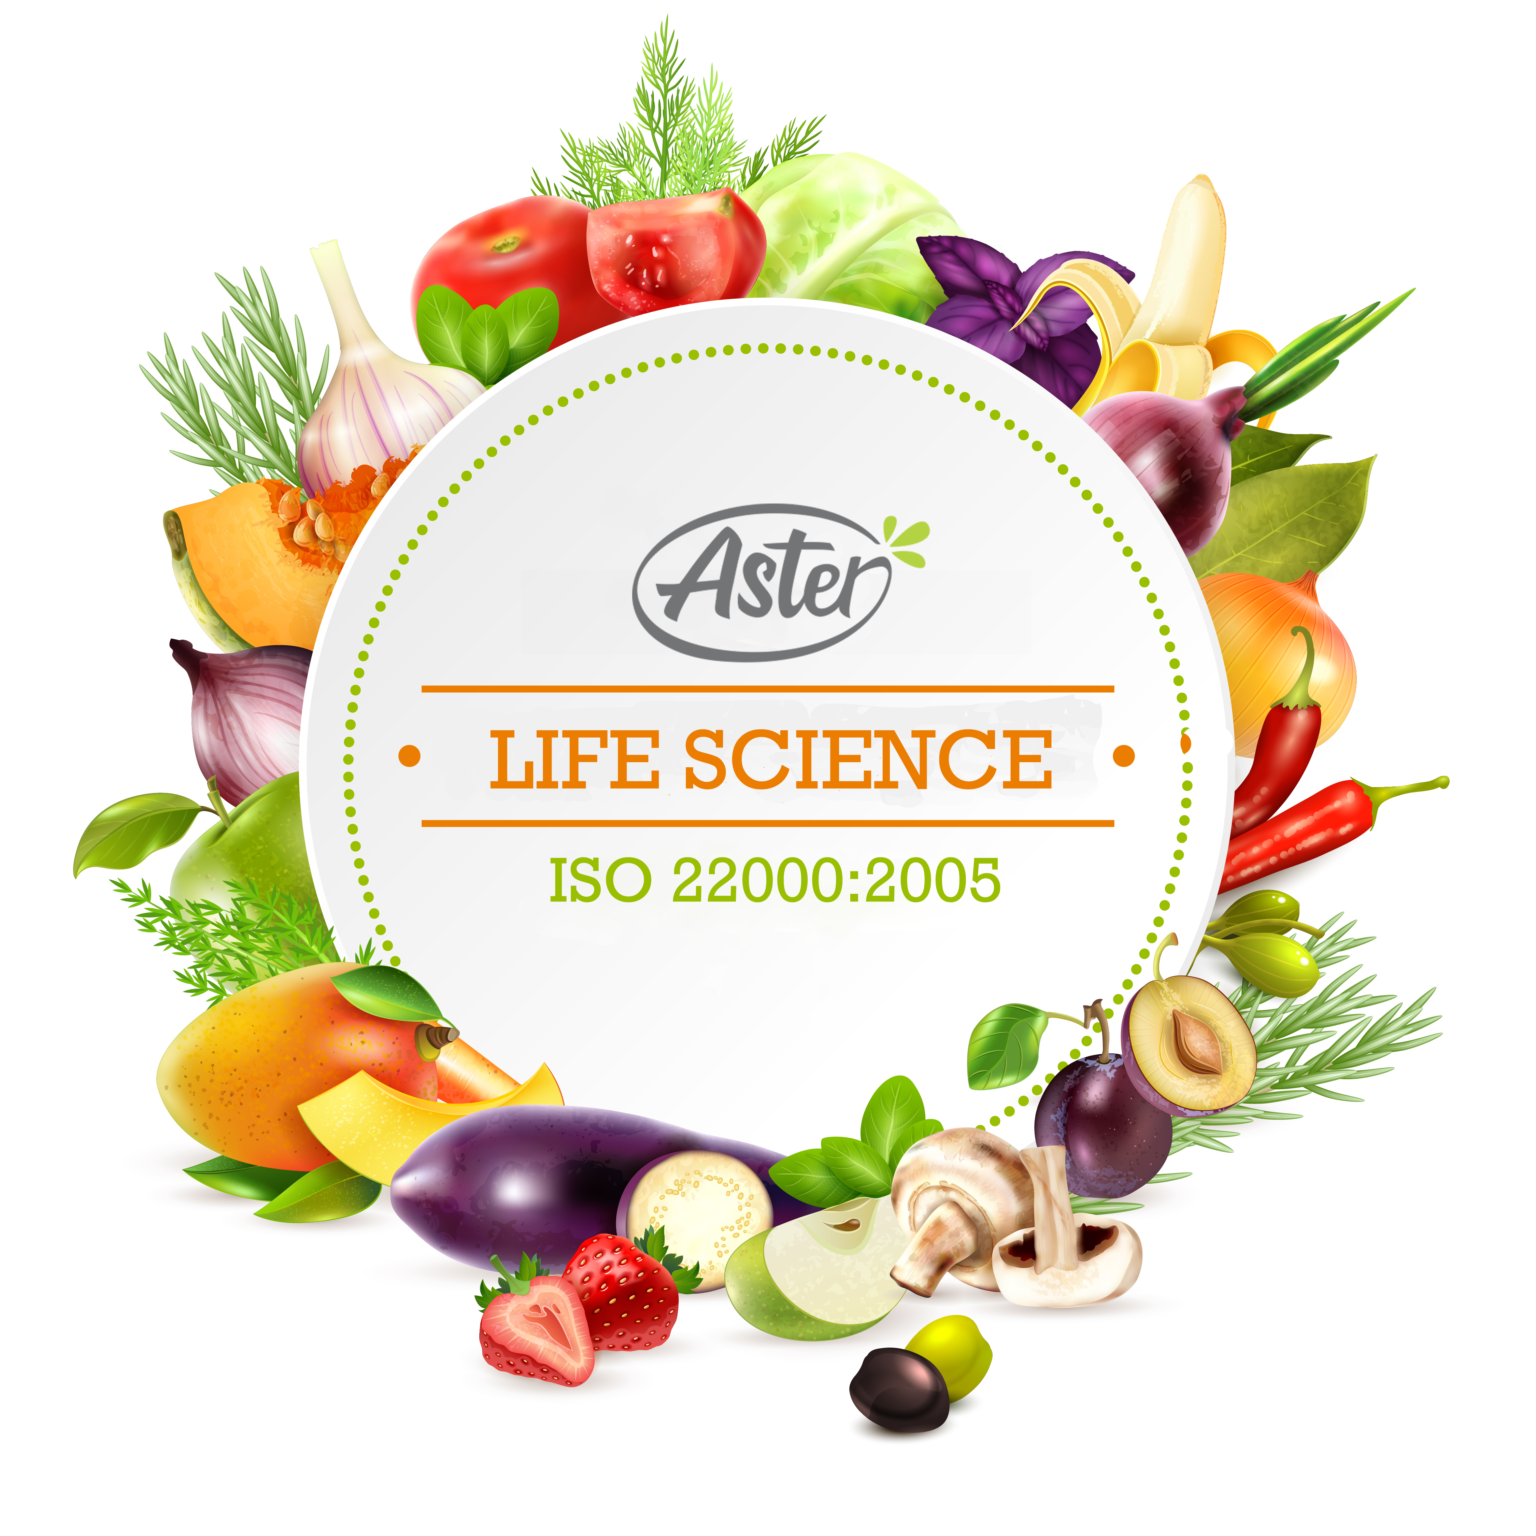 Top Nutraceutical Companies in India – Aster Lifescience